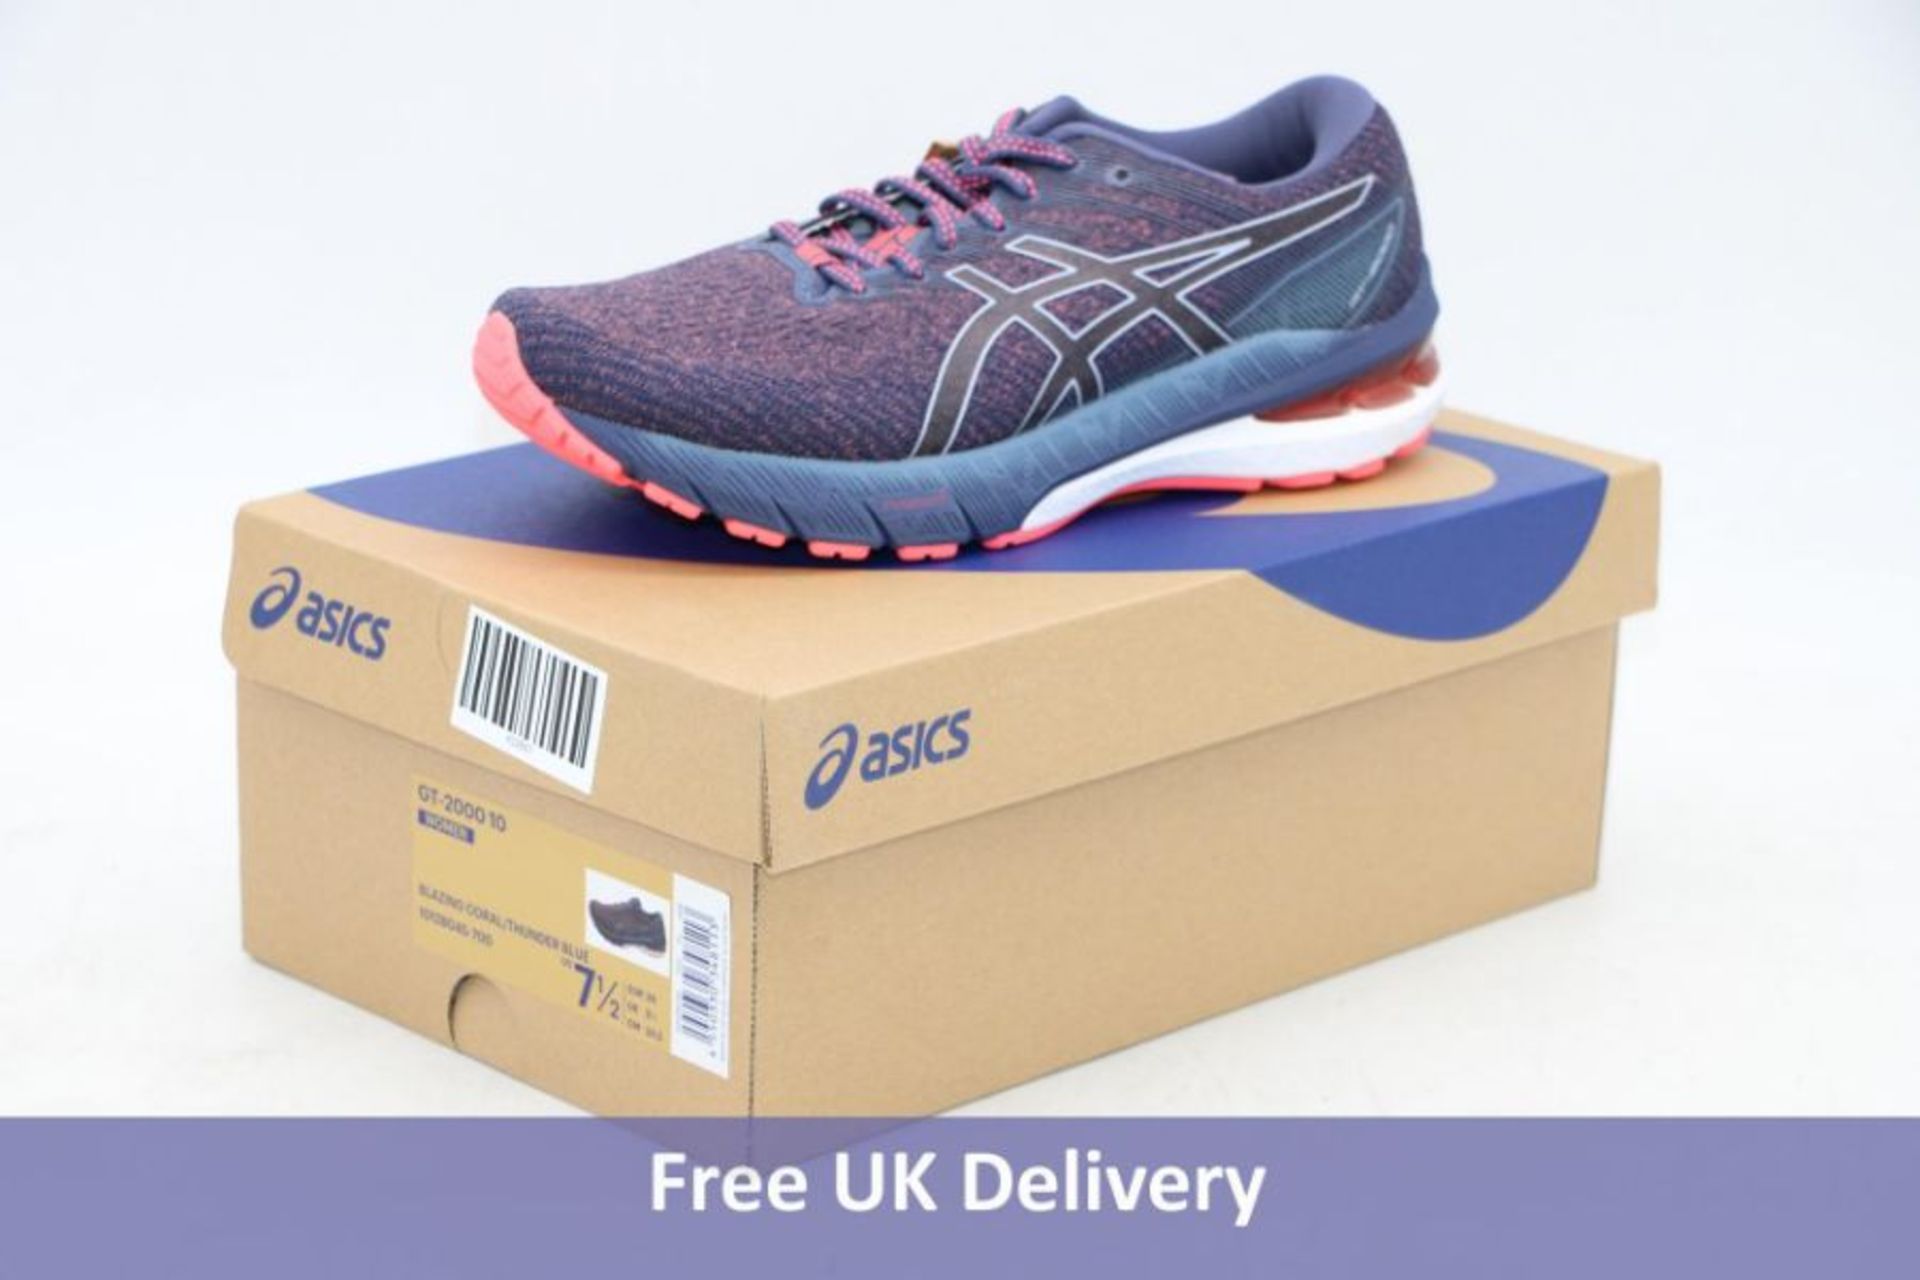 Asics Woman's GT 2000 10 Running Shoes, Blazing Coral/Thunder Blue, UK 7